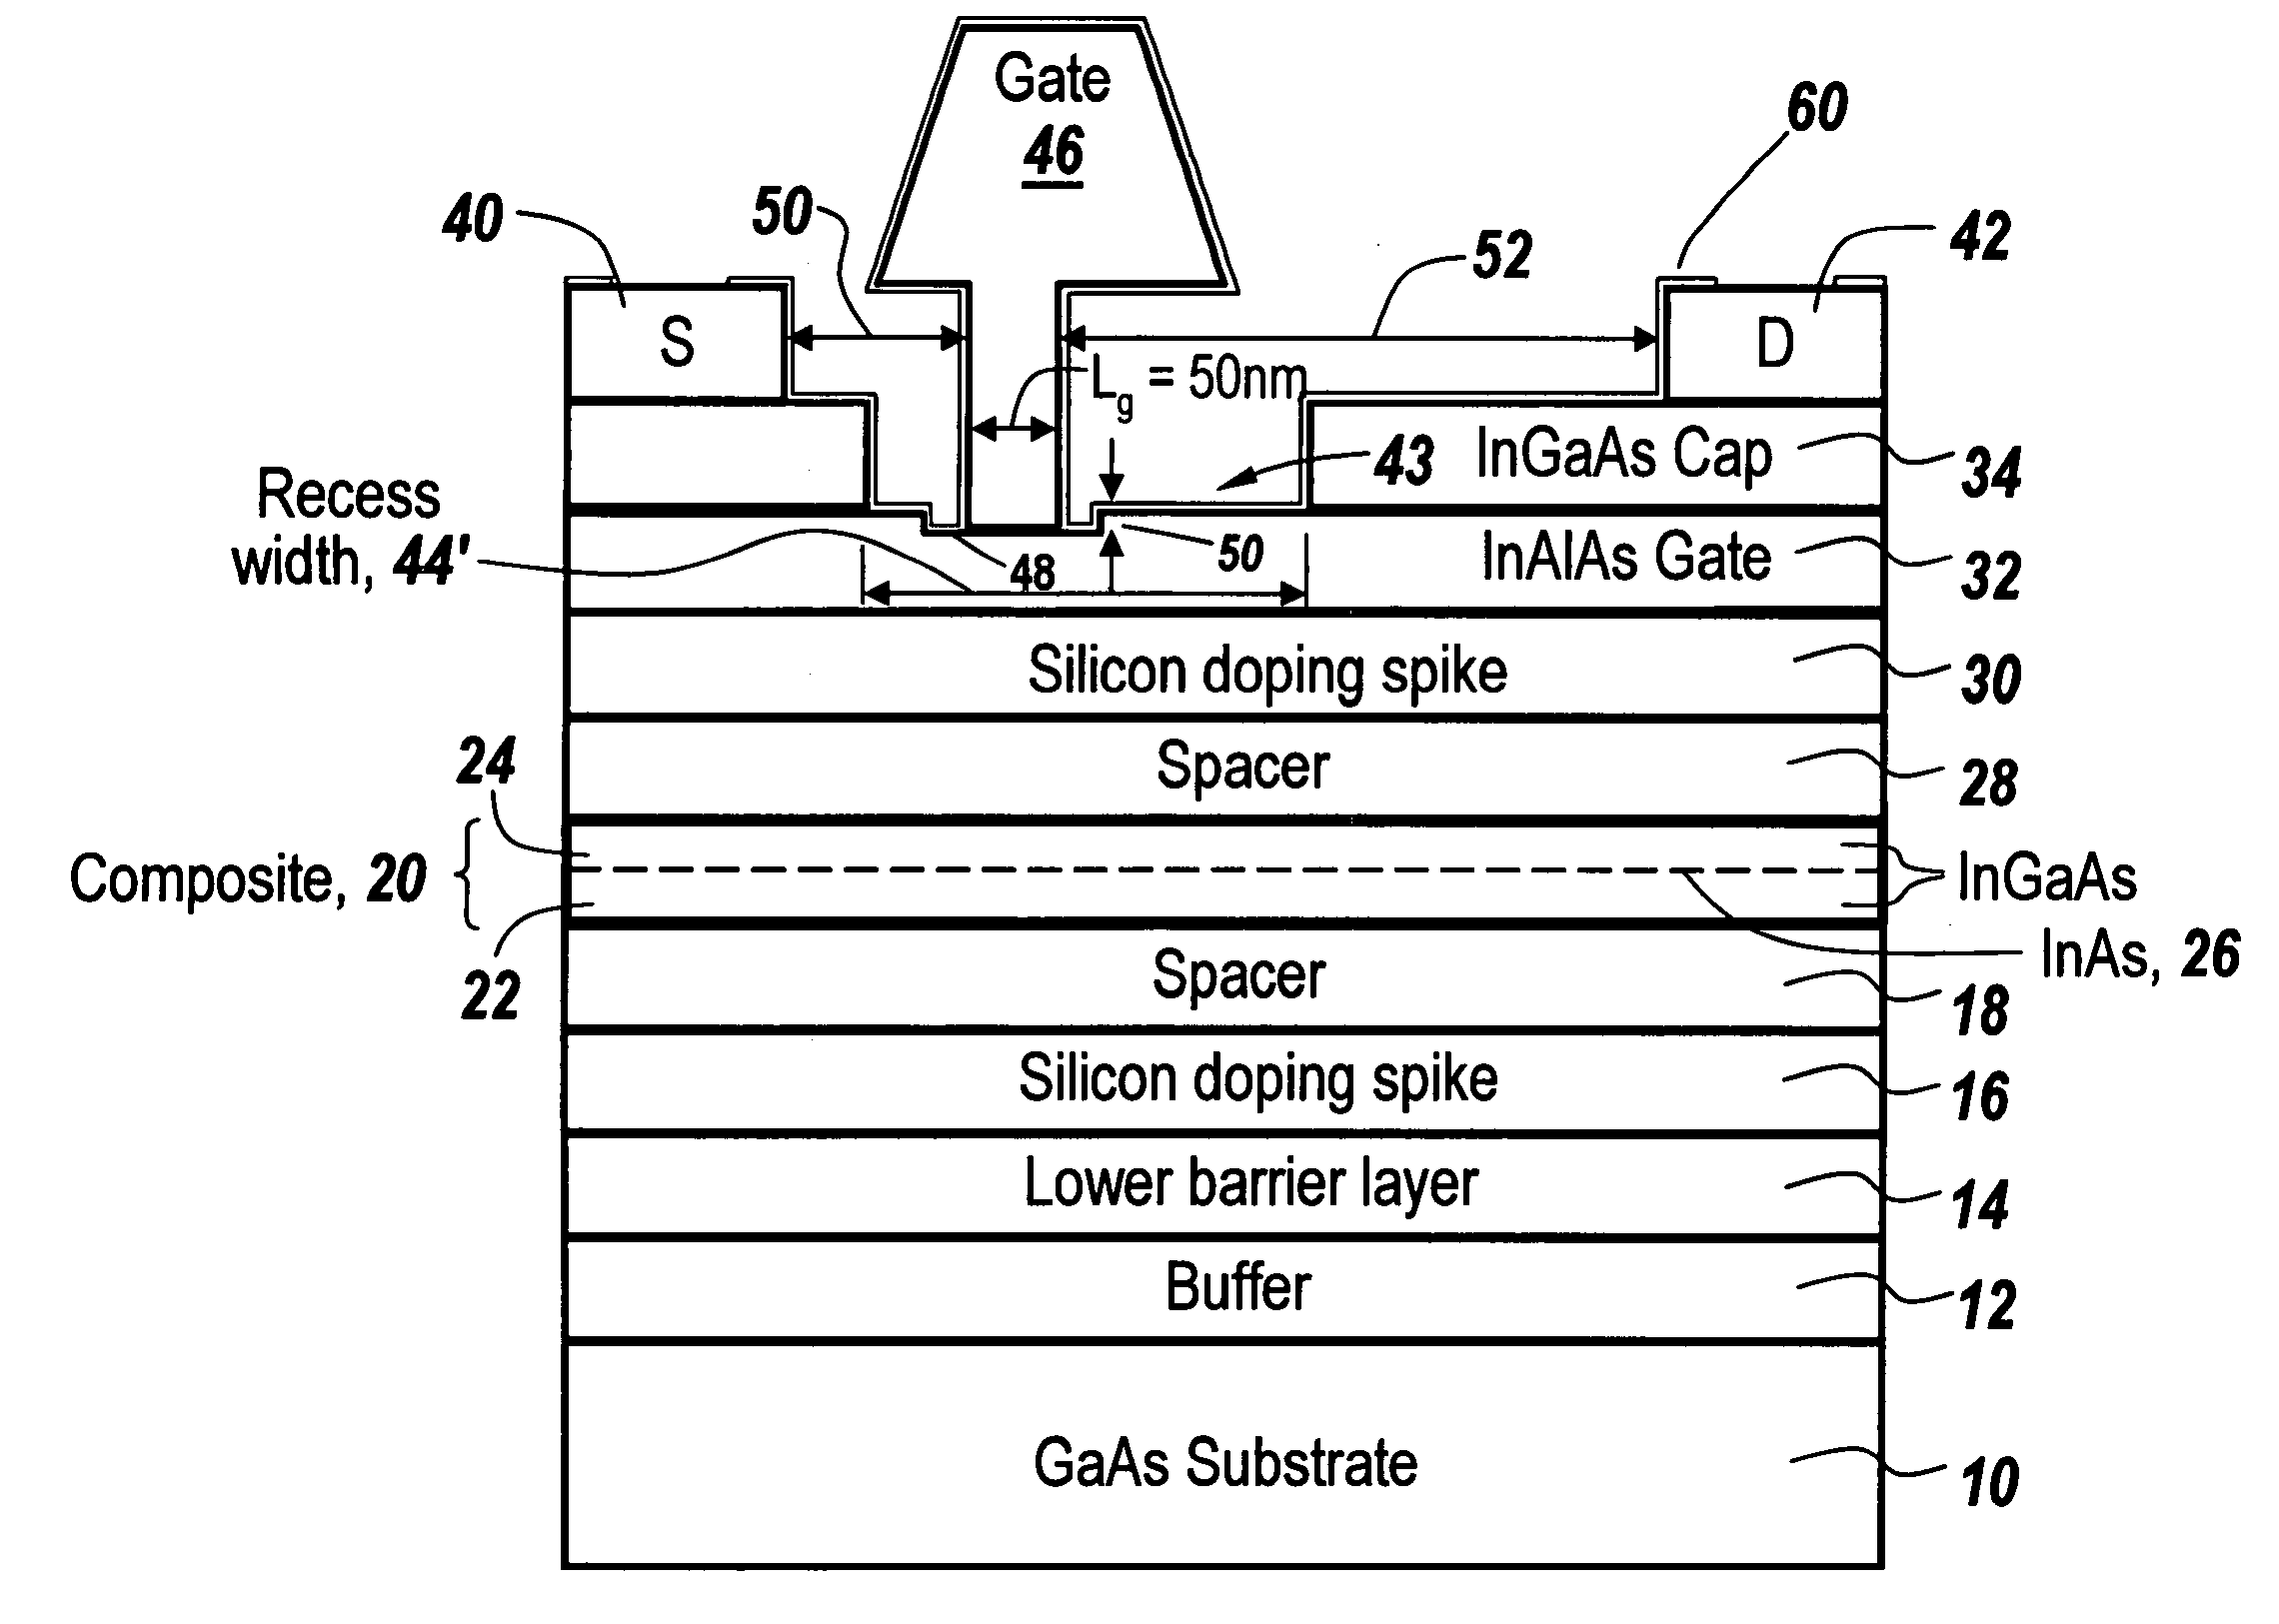 Asymmetrically recessed high-power and high-gain ultra-short gate HEMT device